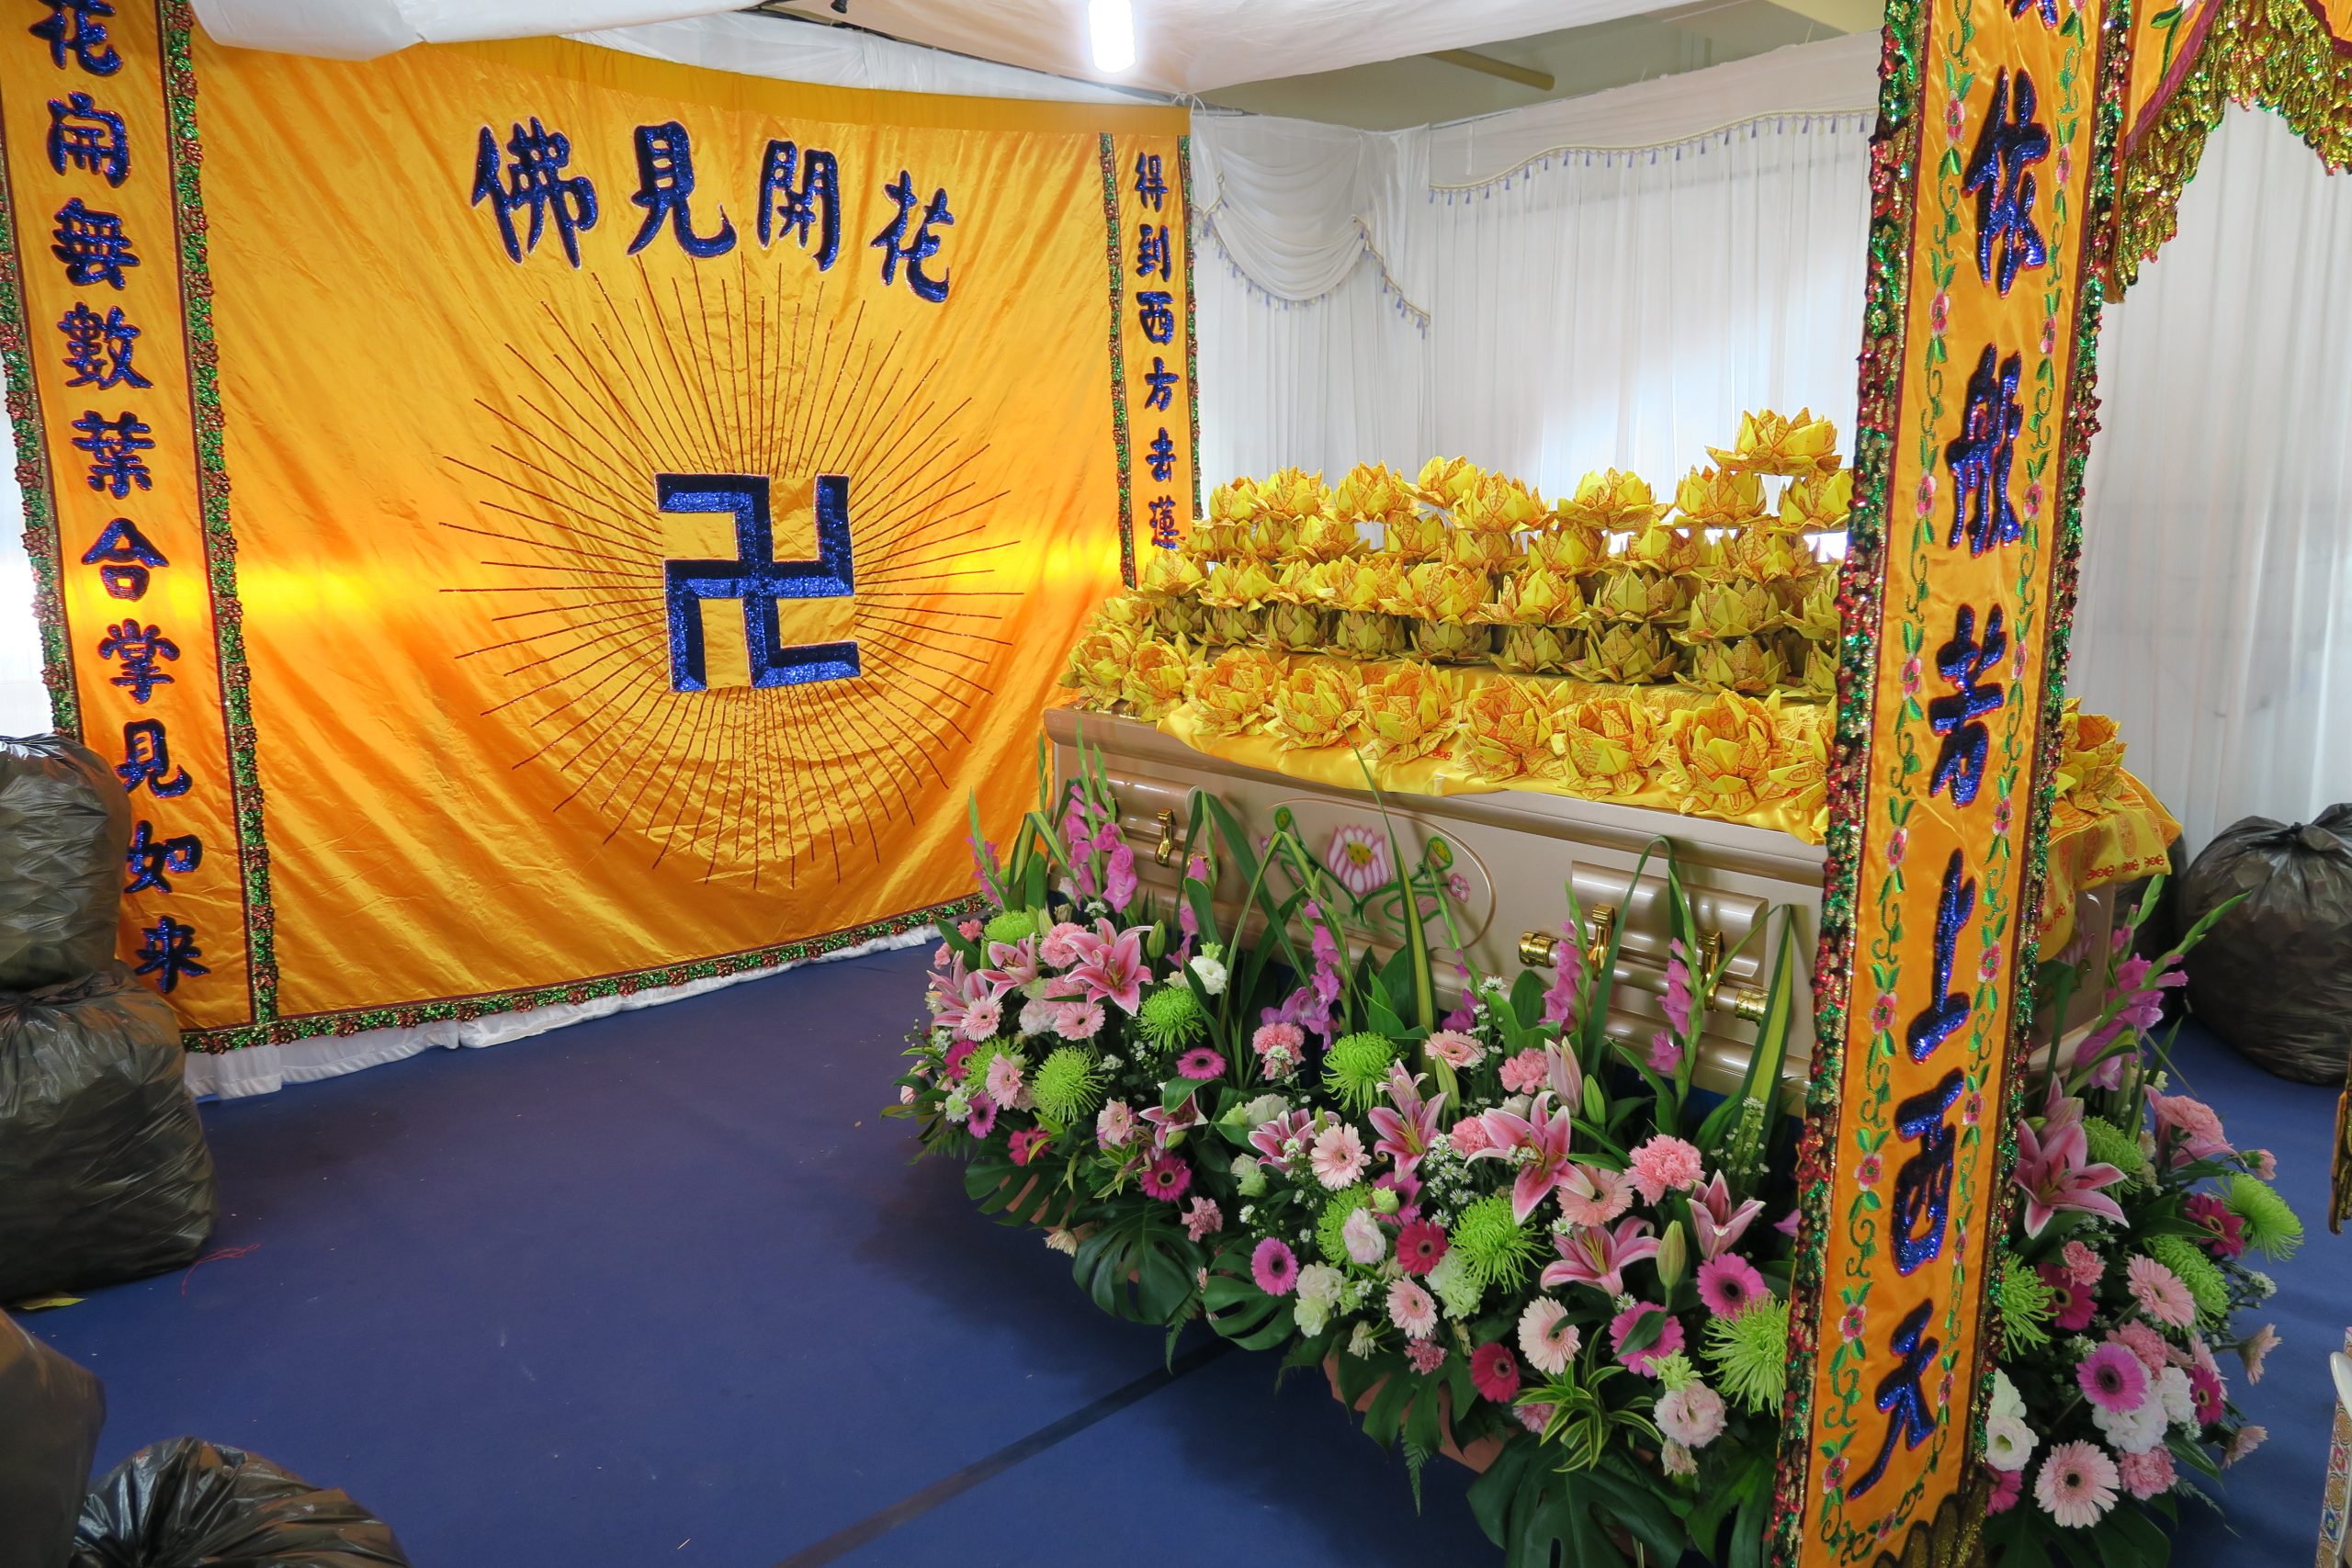 cremation in buddhism